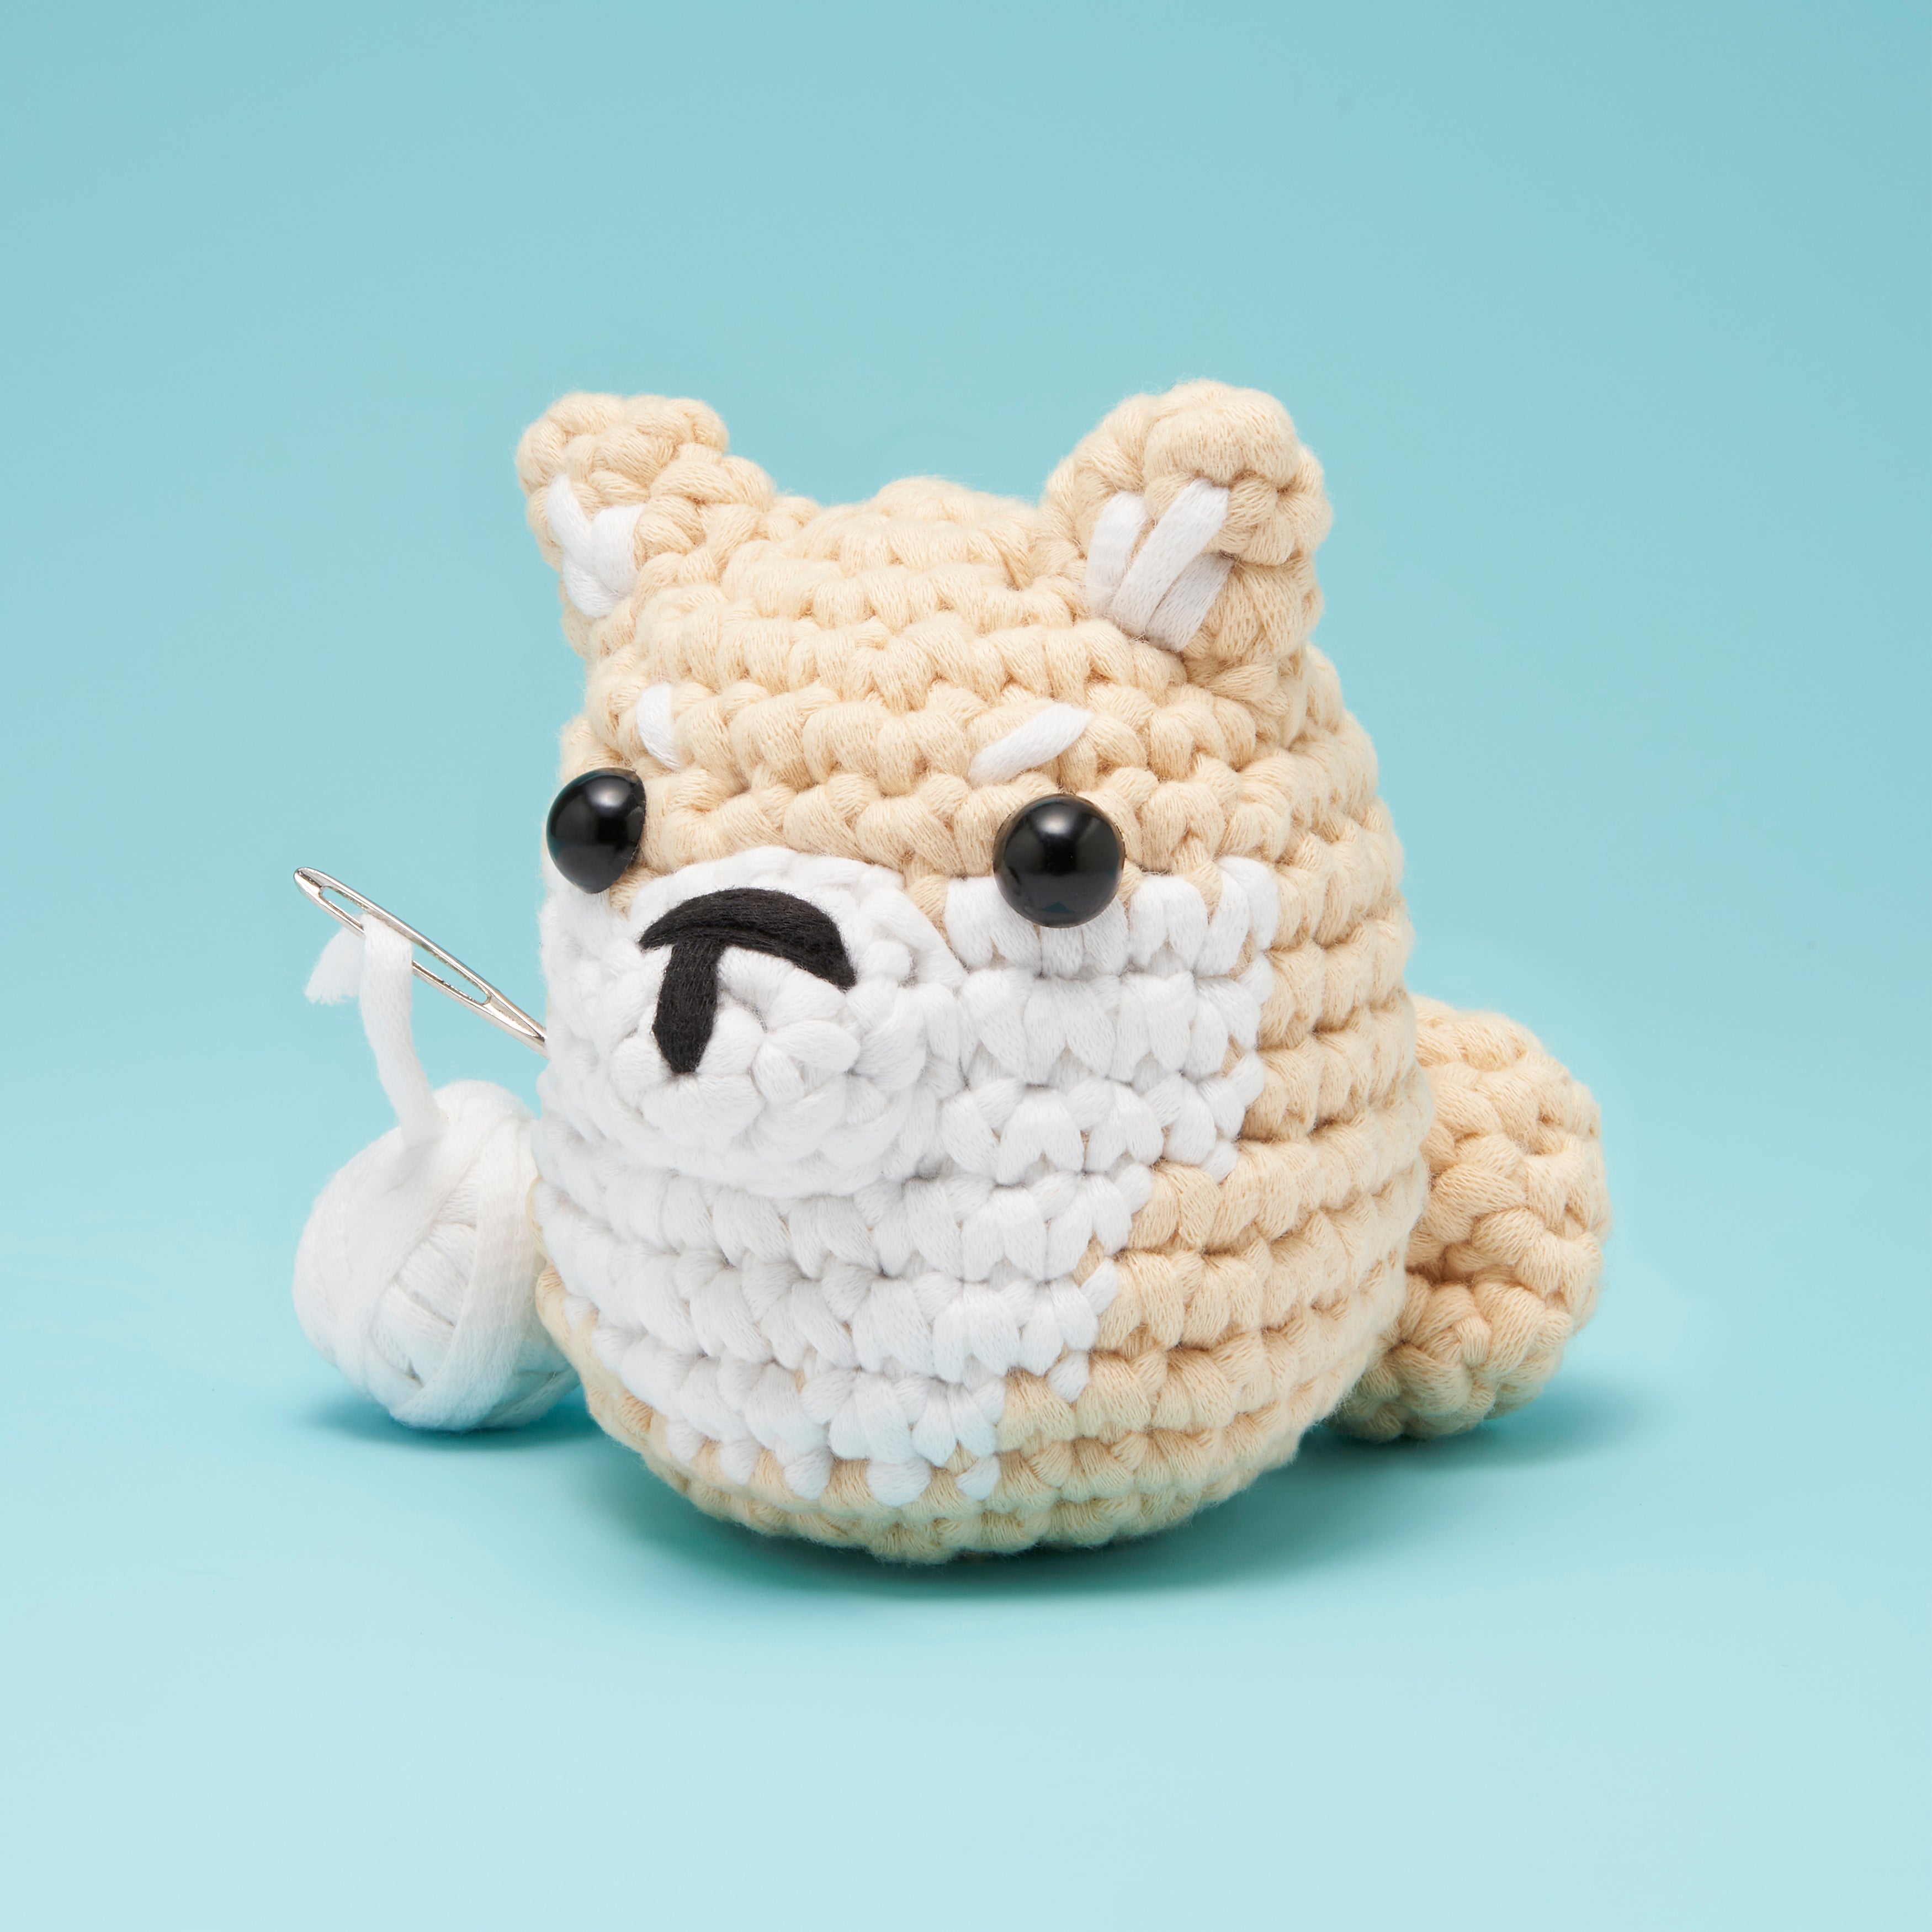 Modernising the art of crocheting with The Woobles – Packaging Of The World